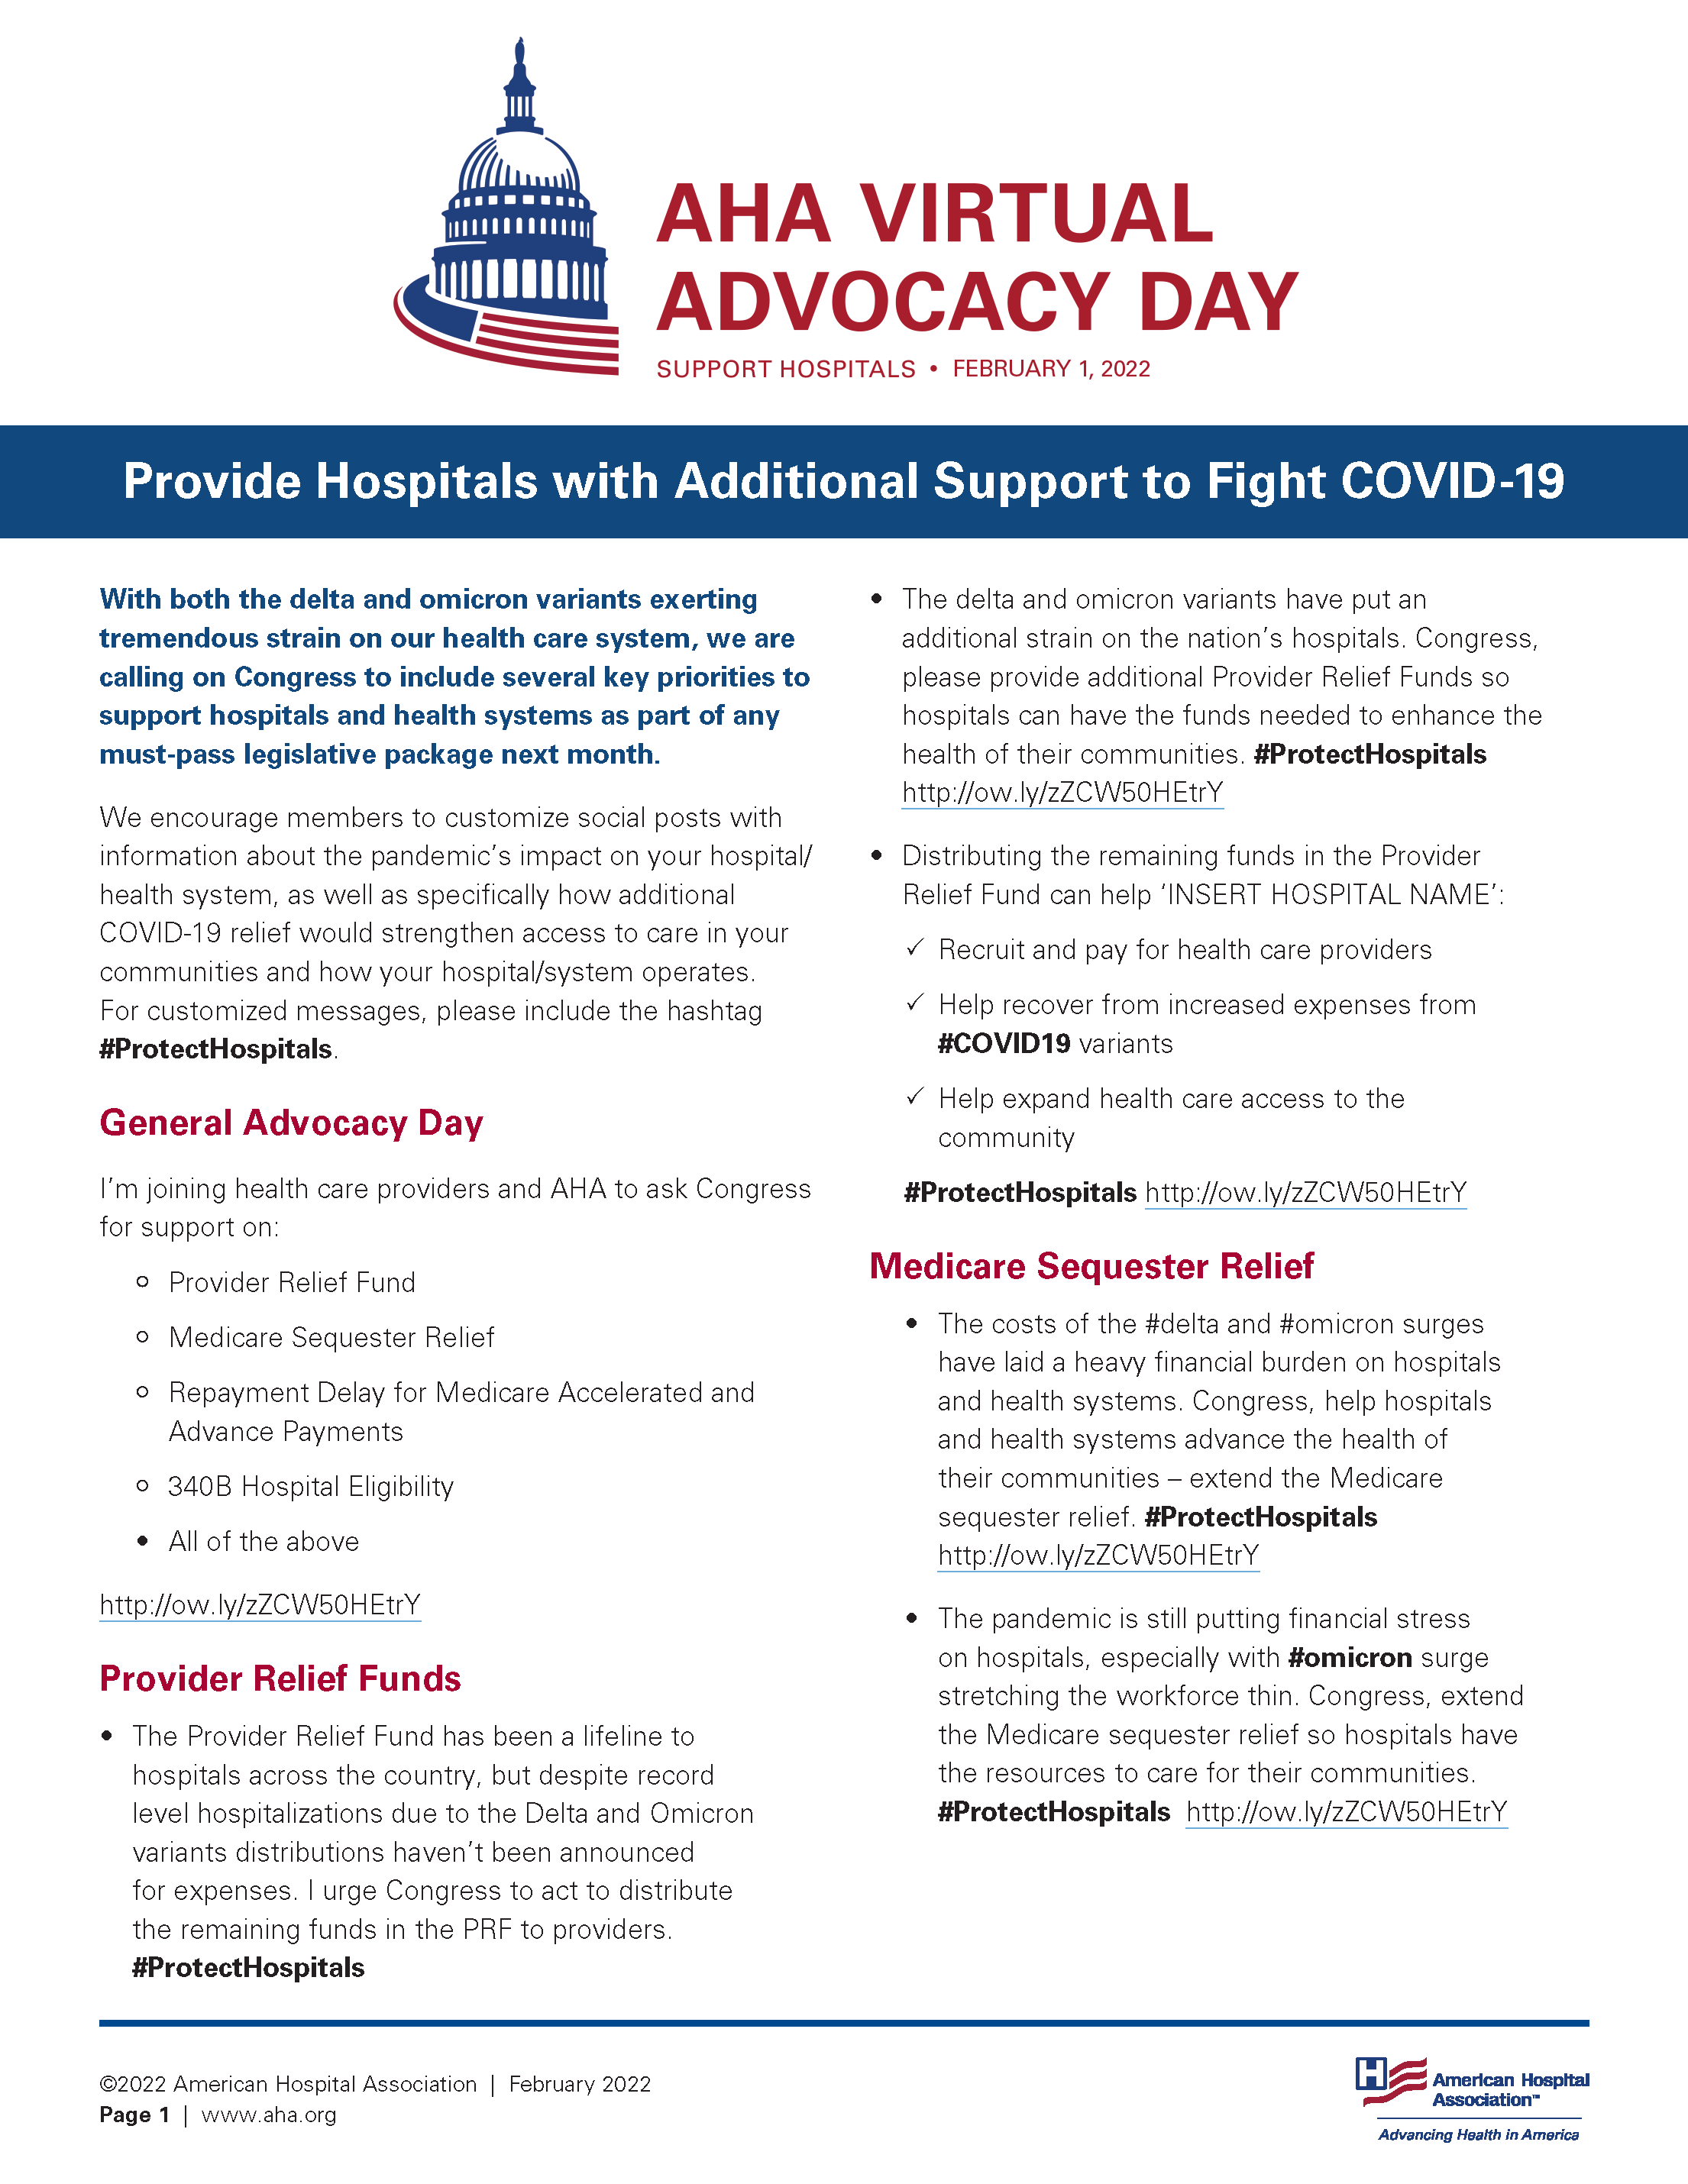 AHA Virtual Advocacy Day February 1, 2022, Digital Toolkit page 1.